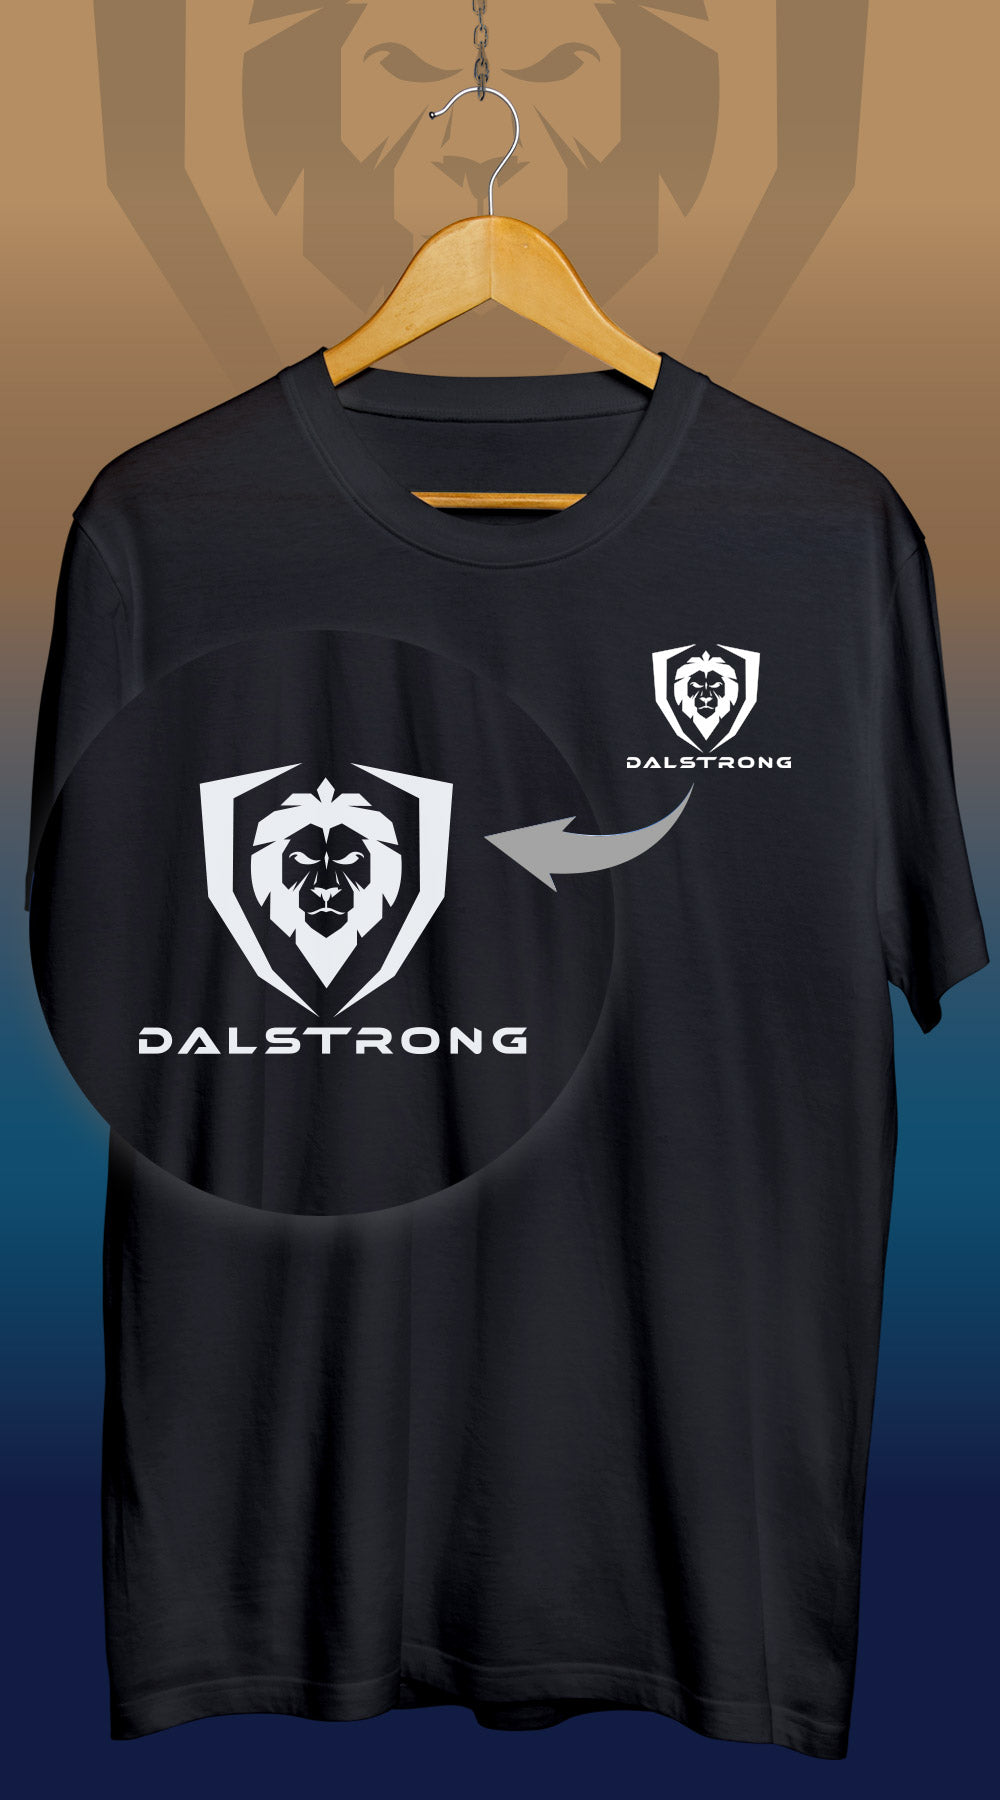 Dalstrong valhalla series tee x arik roper collab black front design with dalstrong name and logo.